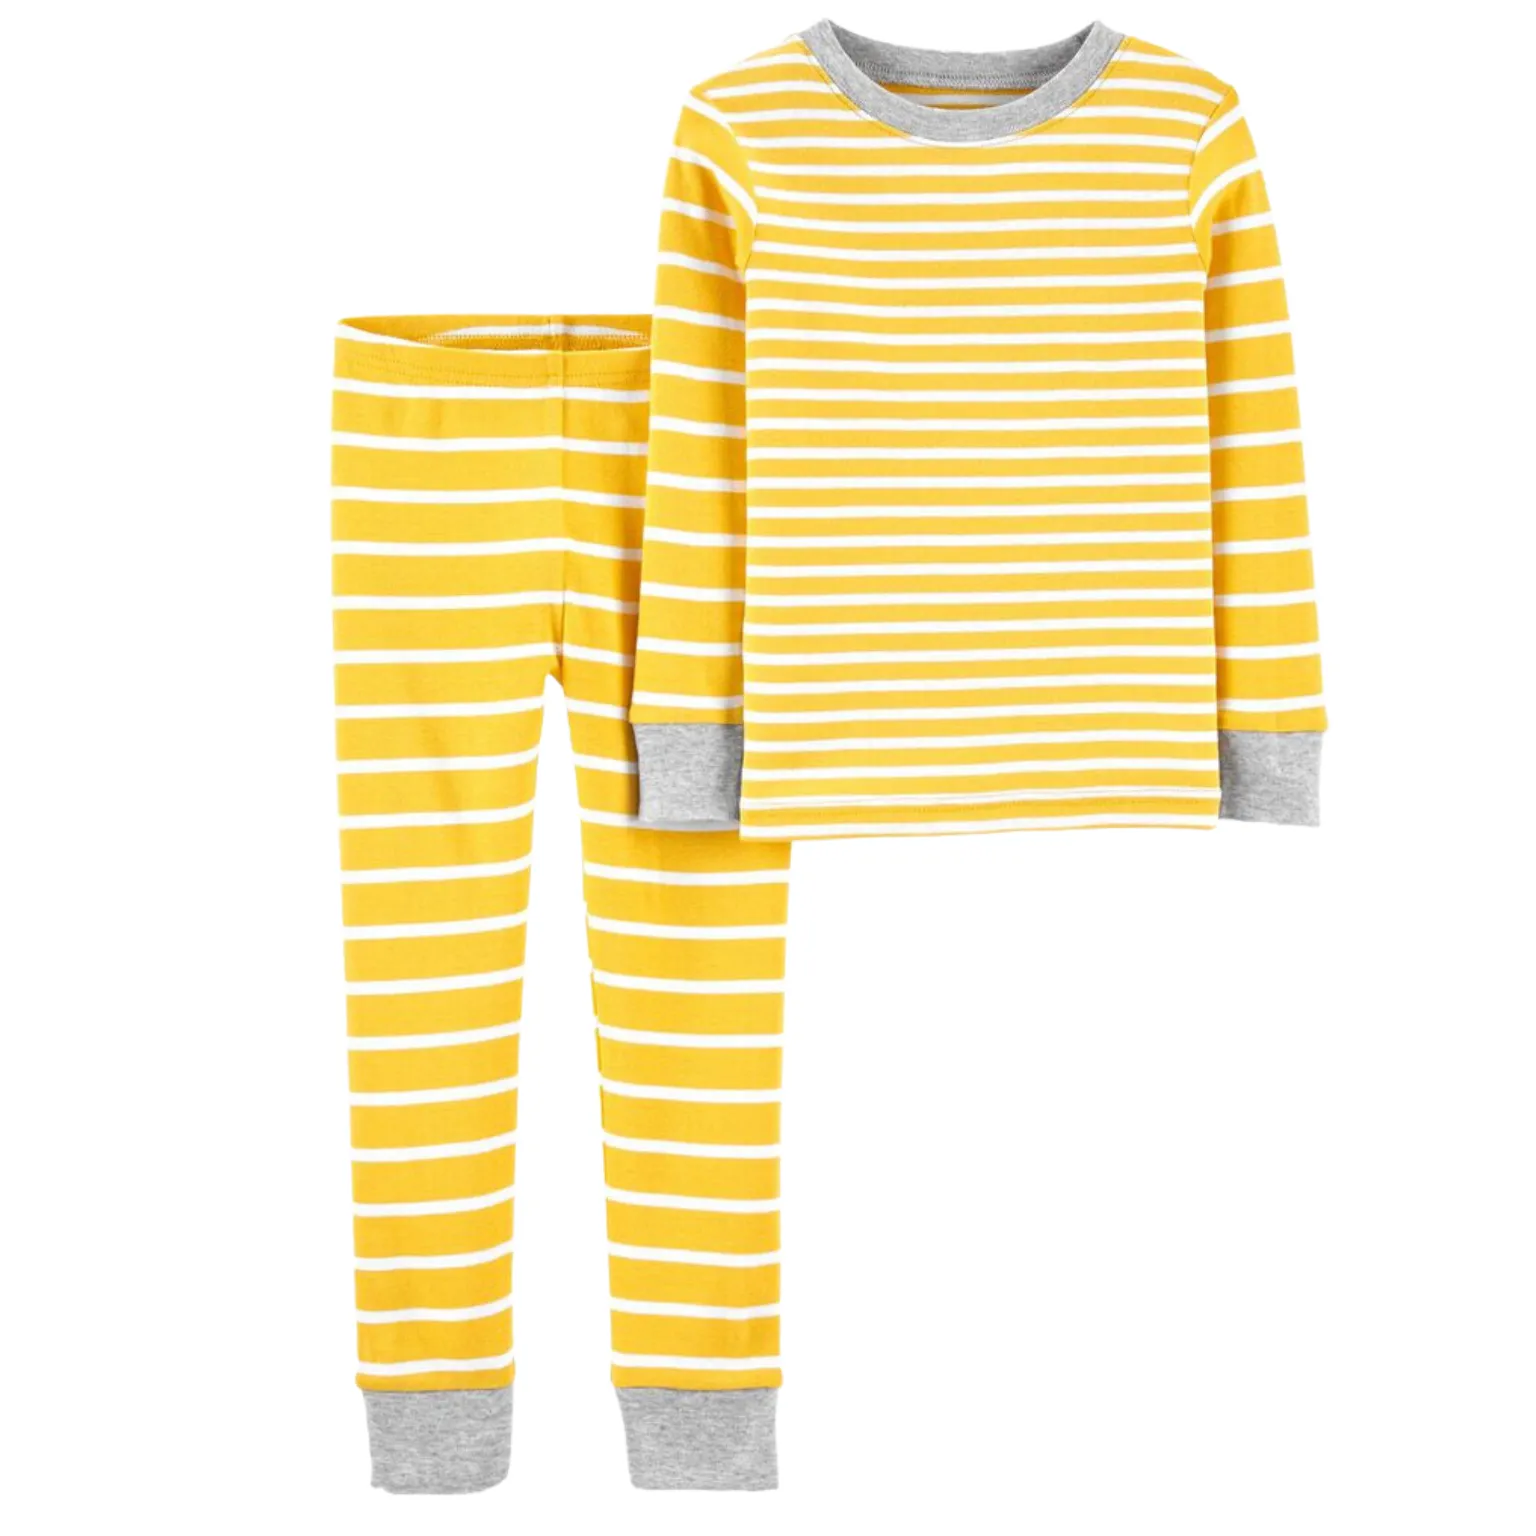 triped Pajamas manufacturing with trendy design